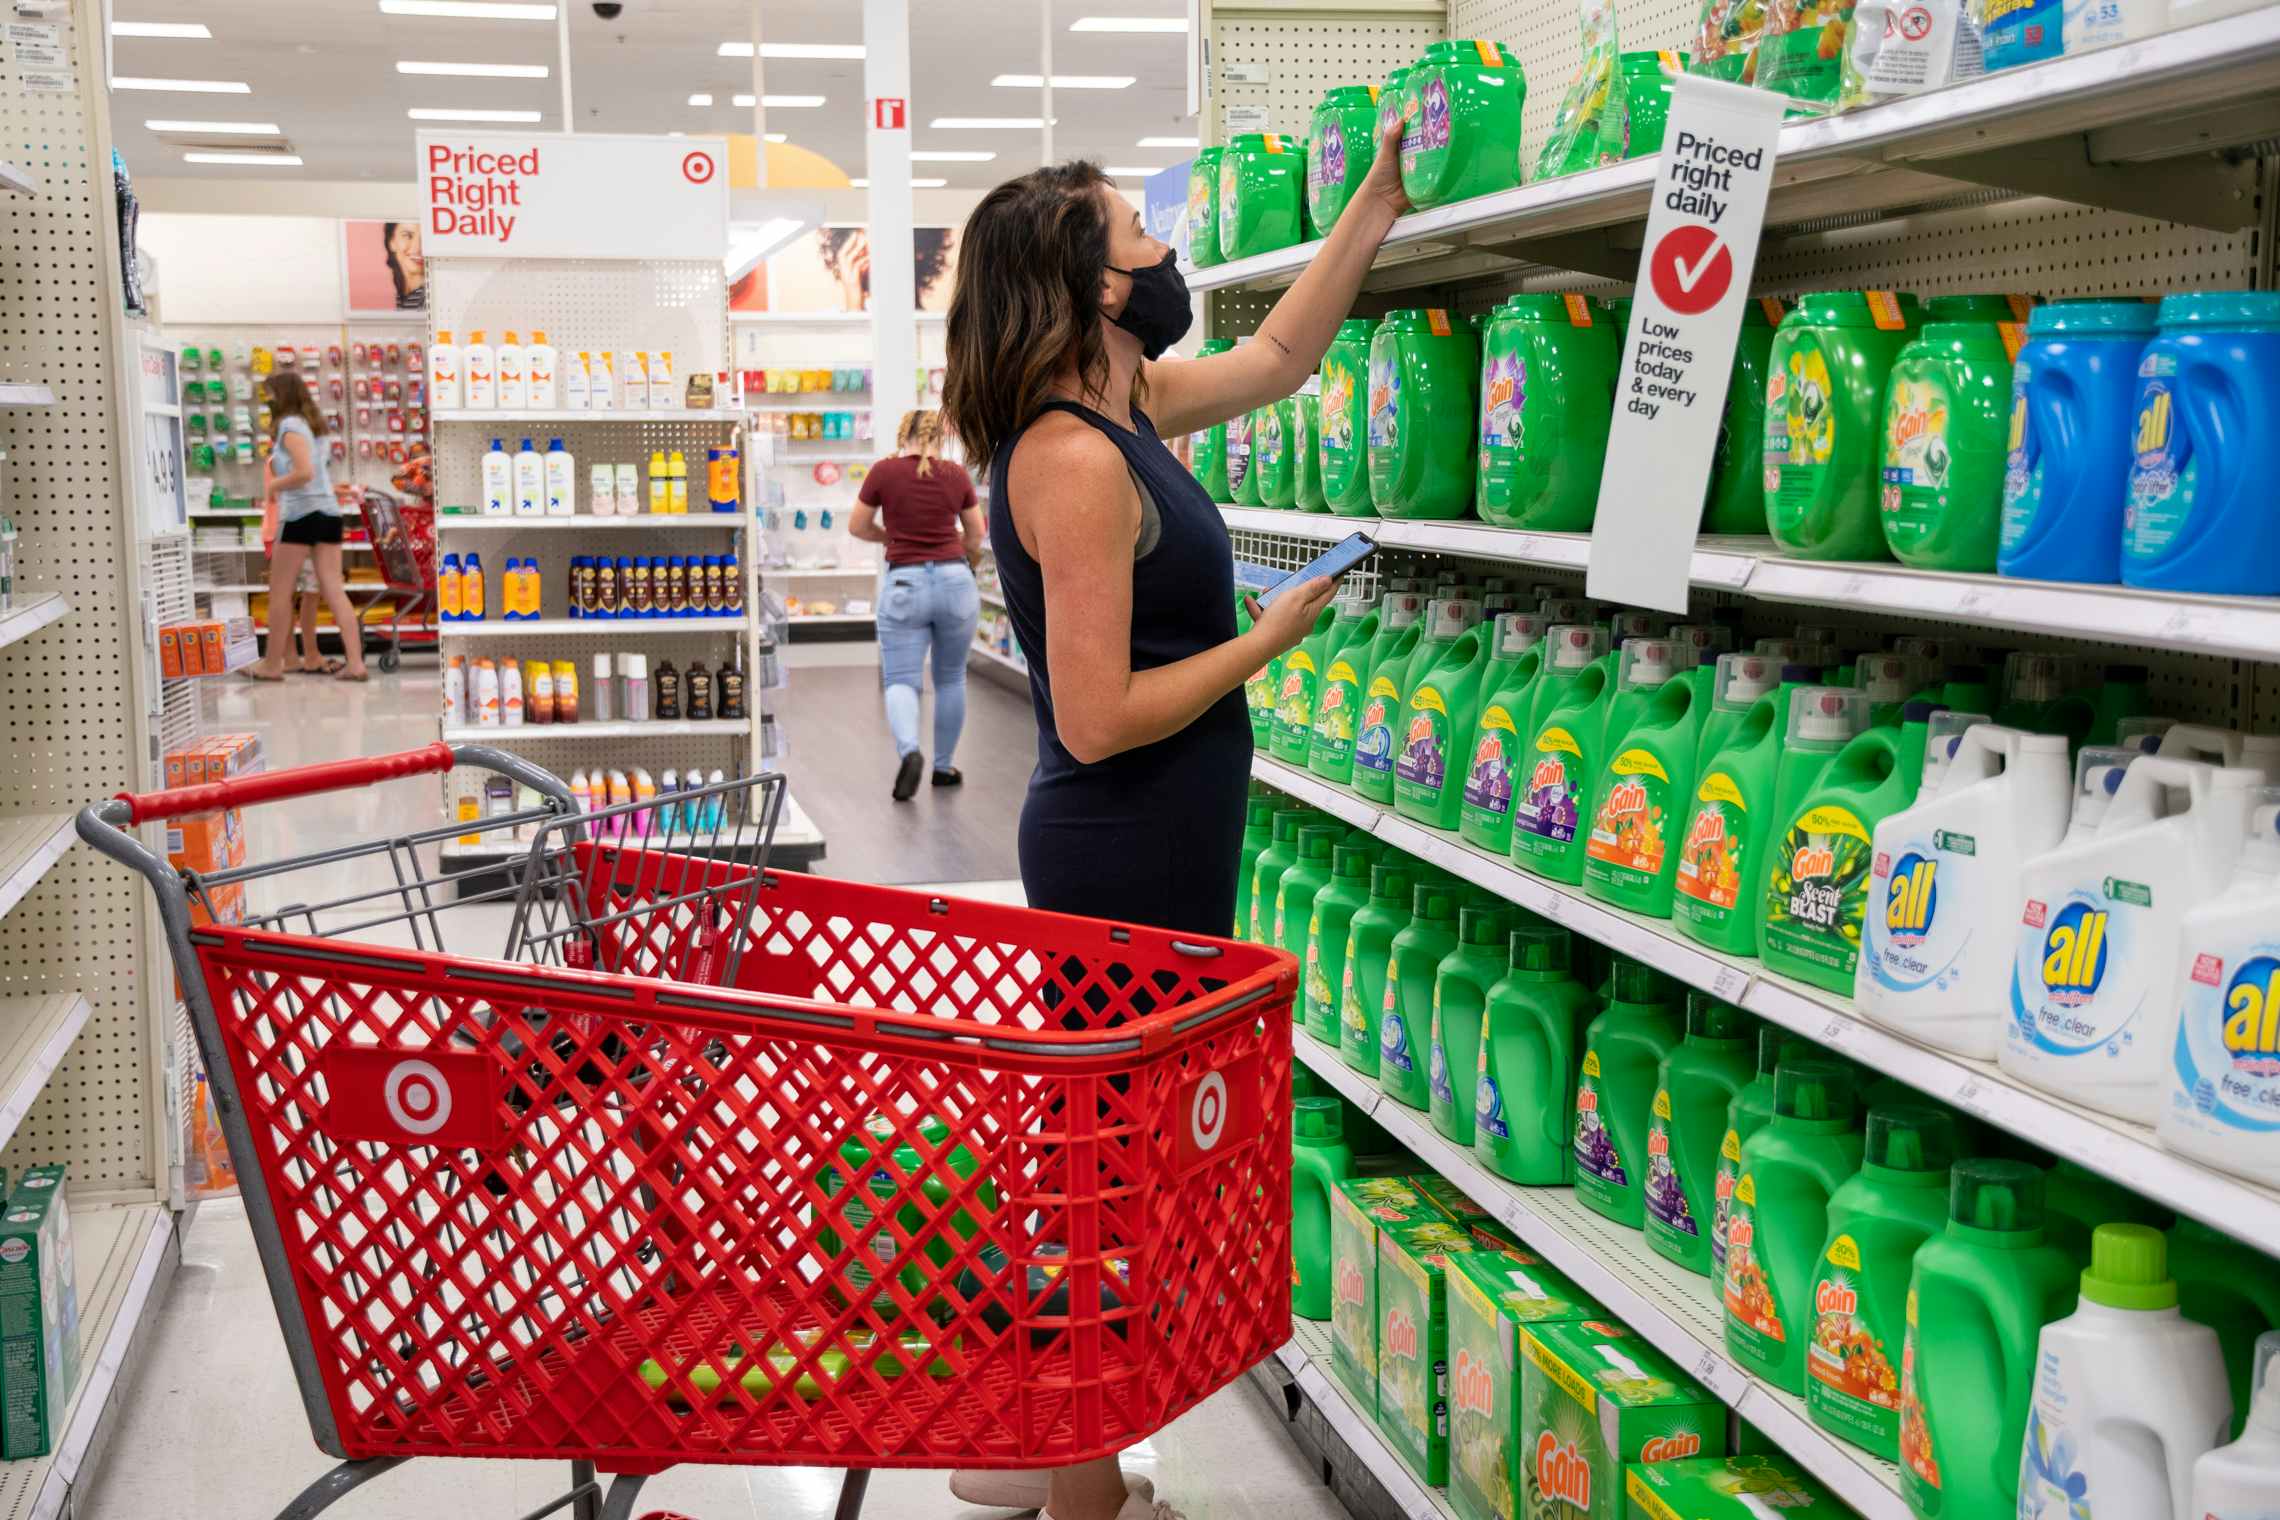 A woman standing in the laundry detergent aisle at Target, reaching to grab a container of Gain off of the top shelf. Next to her is a Target shopping cart with other laundry products sitting in it.